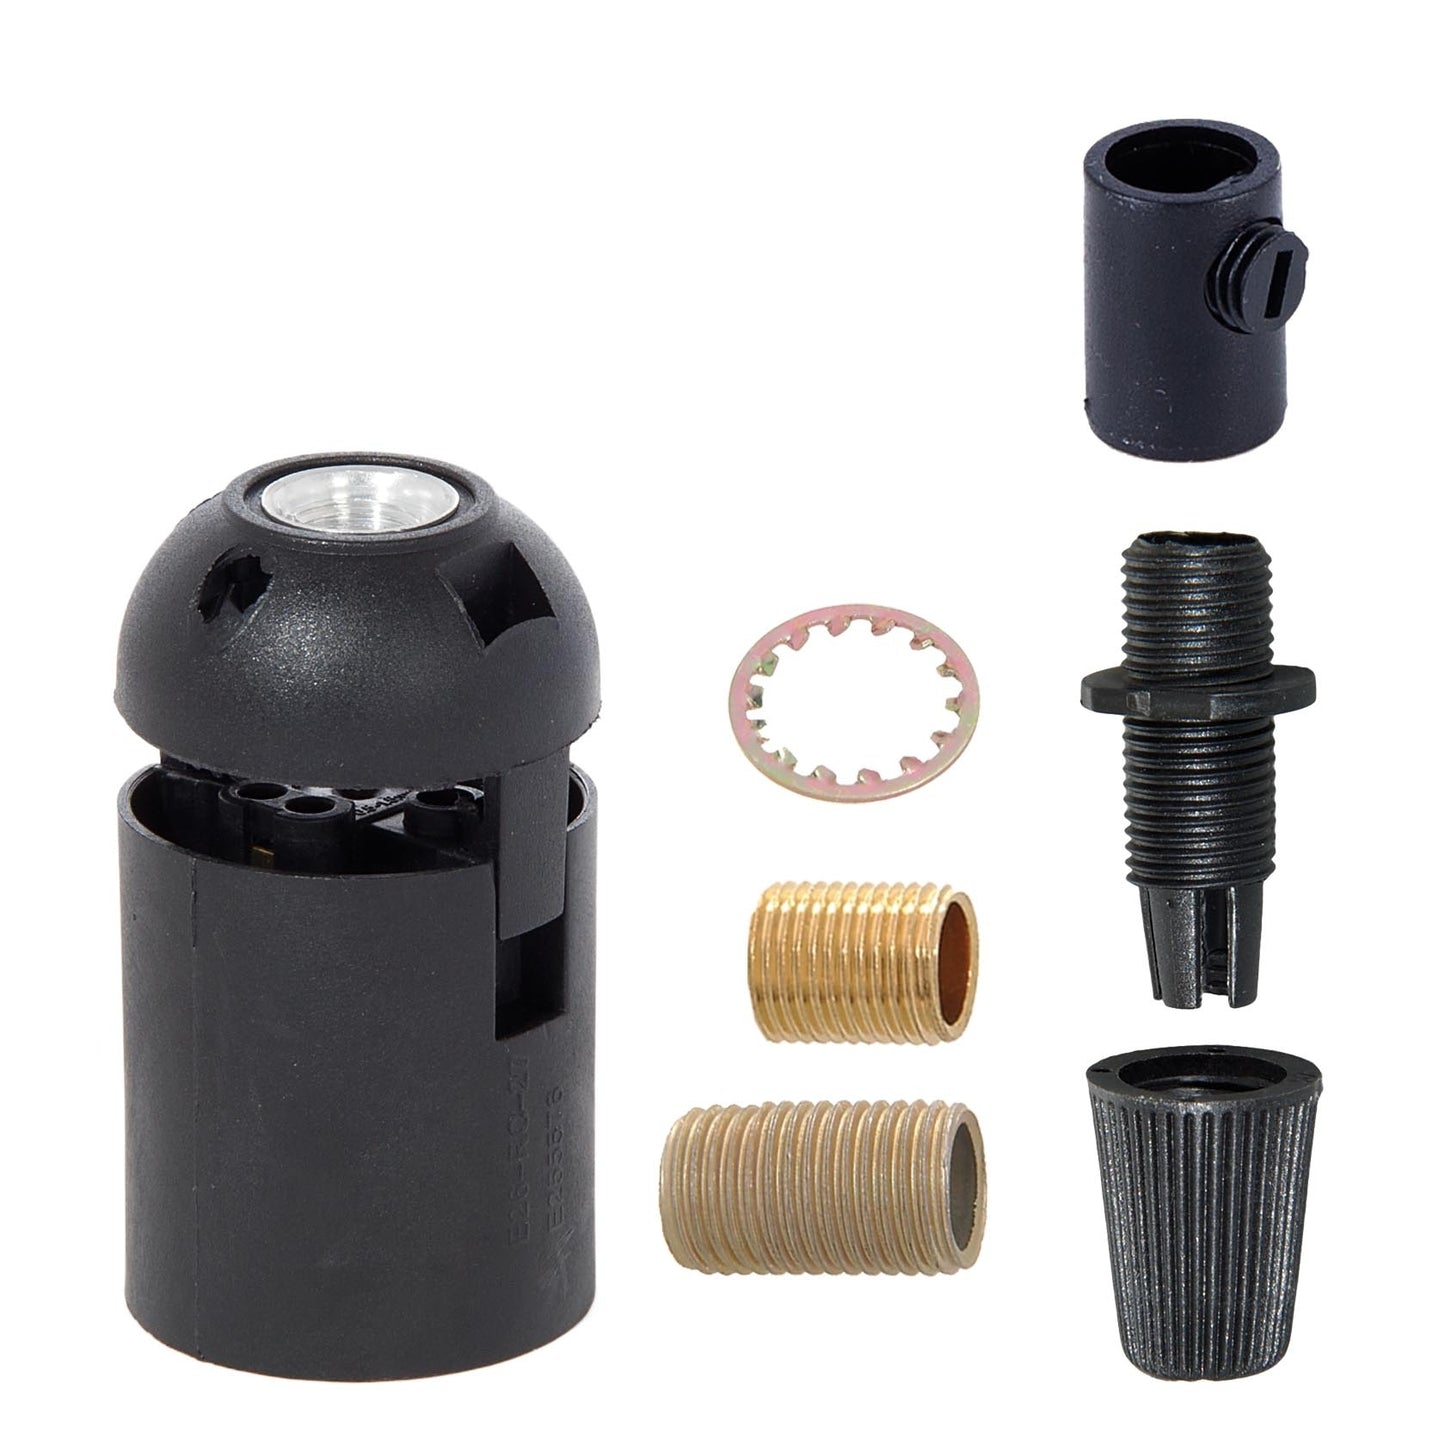 Satin Brass E-26 Lamp Socket Cup with COMPLETE with Socket and Mounting Hardware